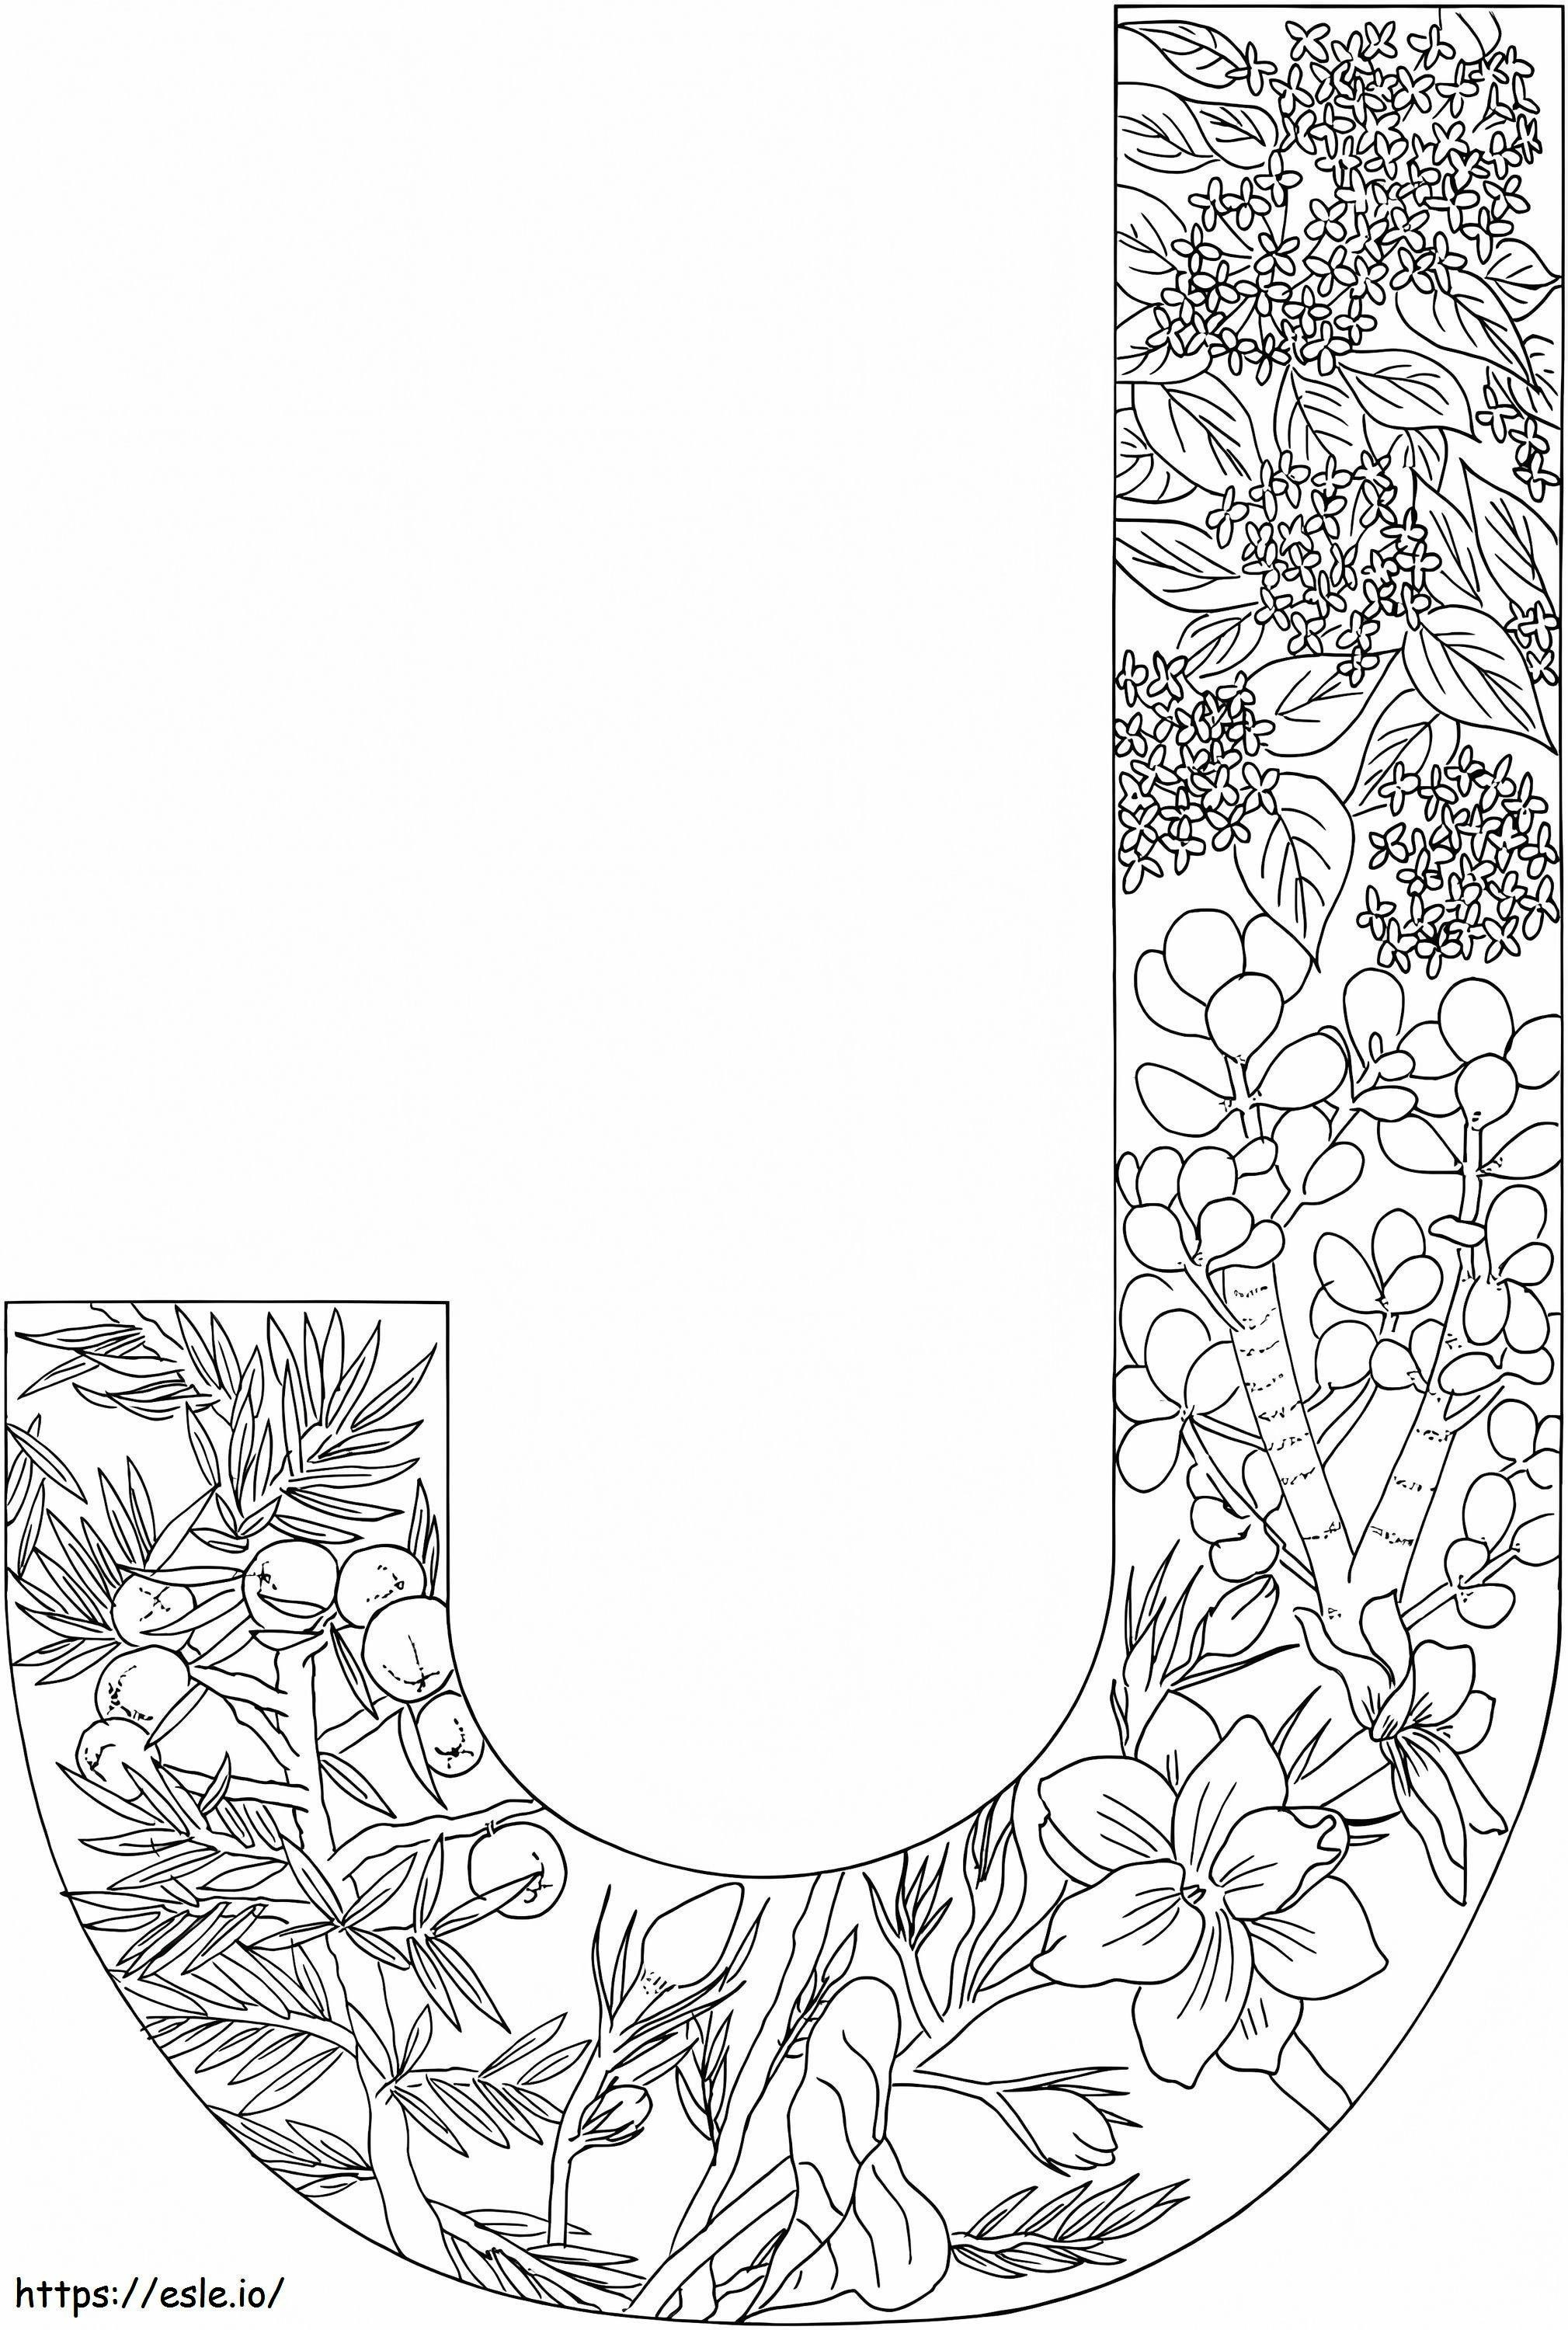 Letter J 5 coloring page